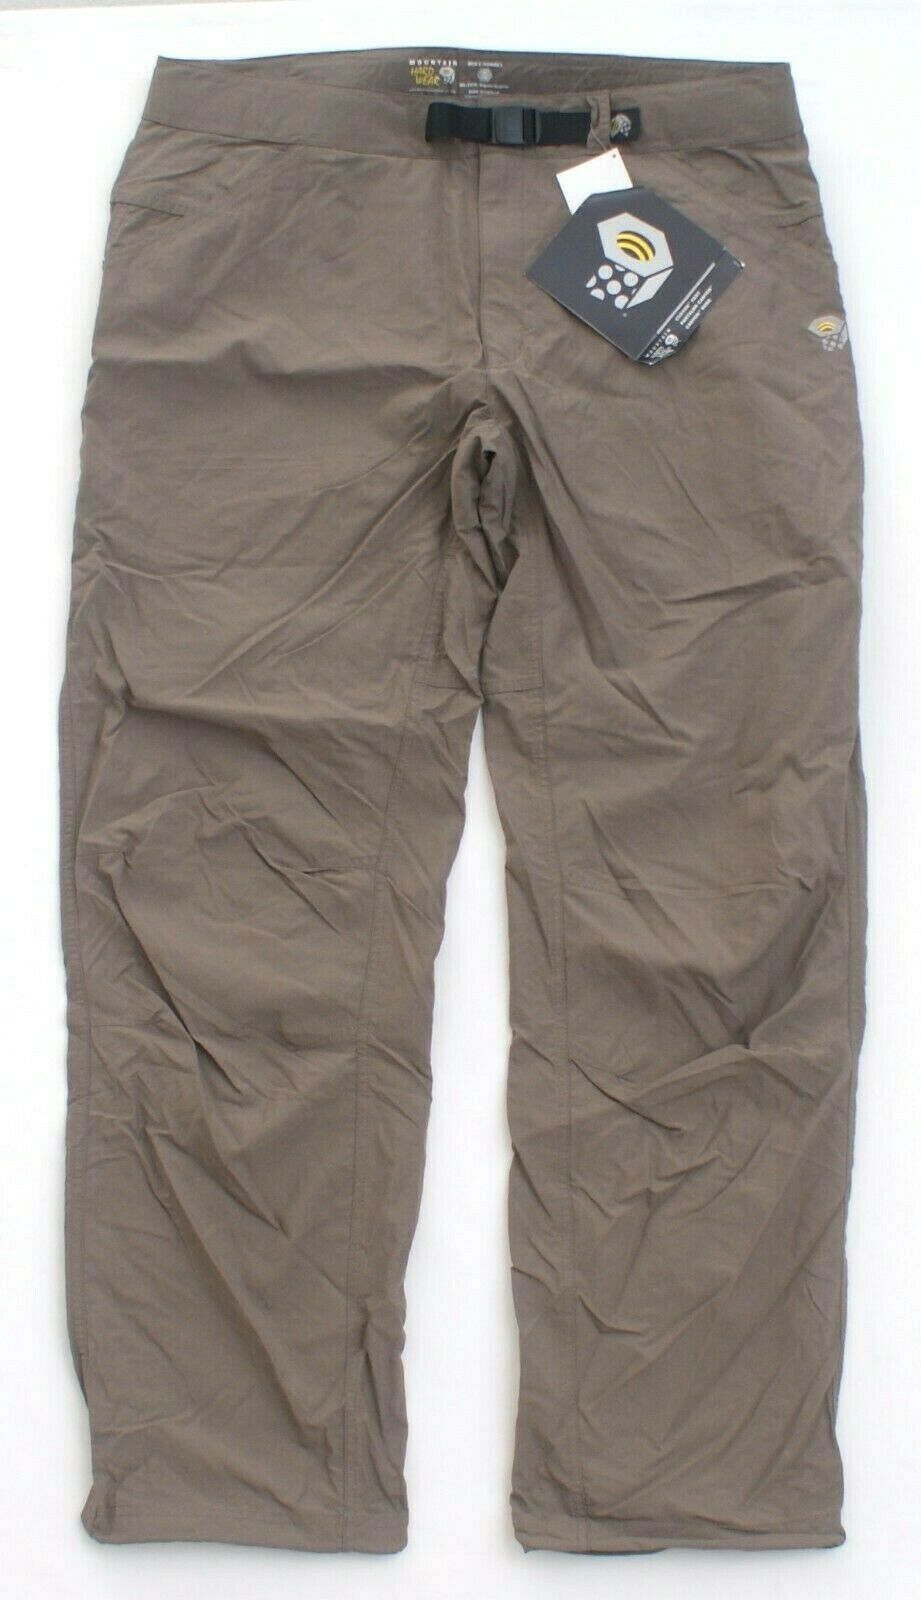 Primary image for Mountain Hardwear Chaparral Canyon Pants Men's NWT